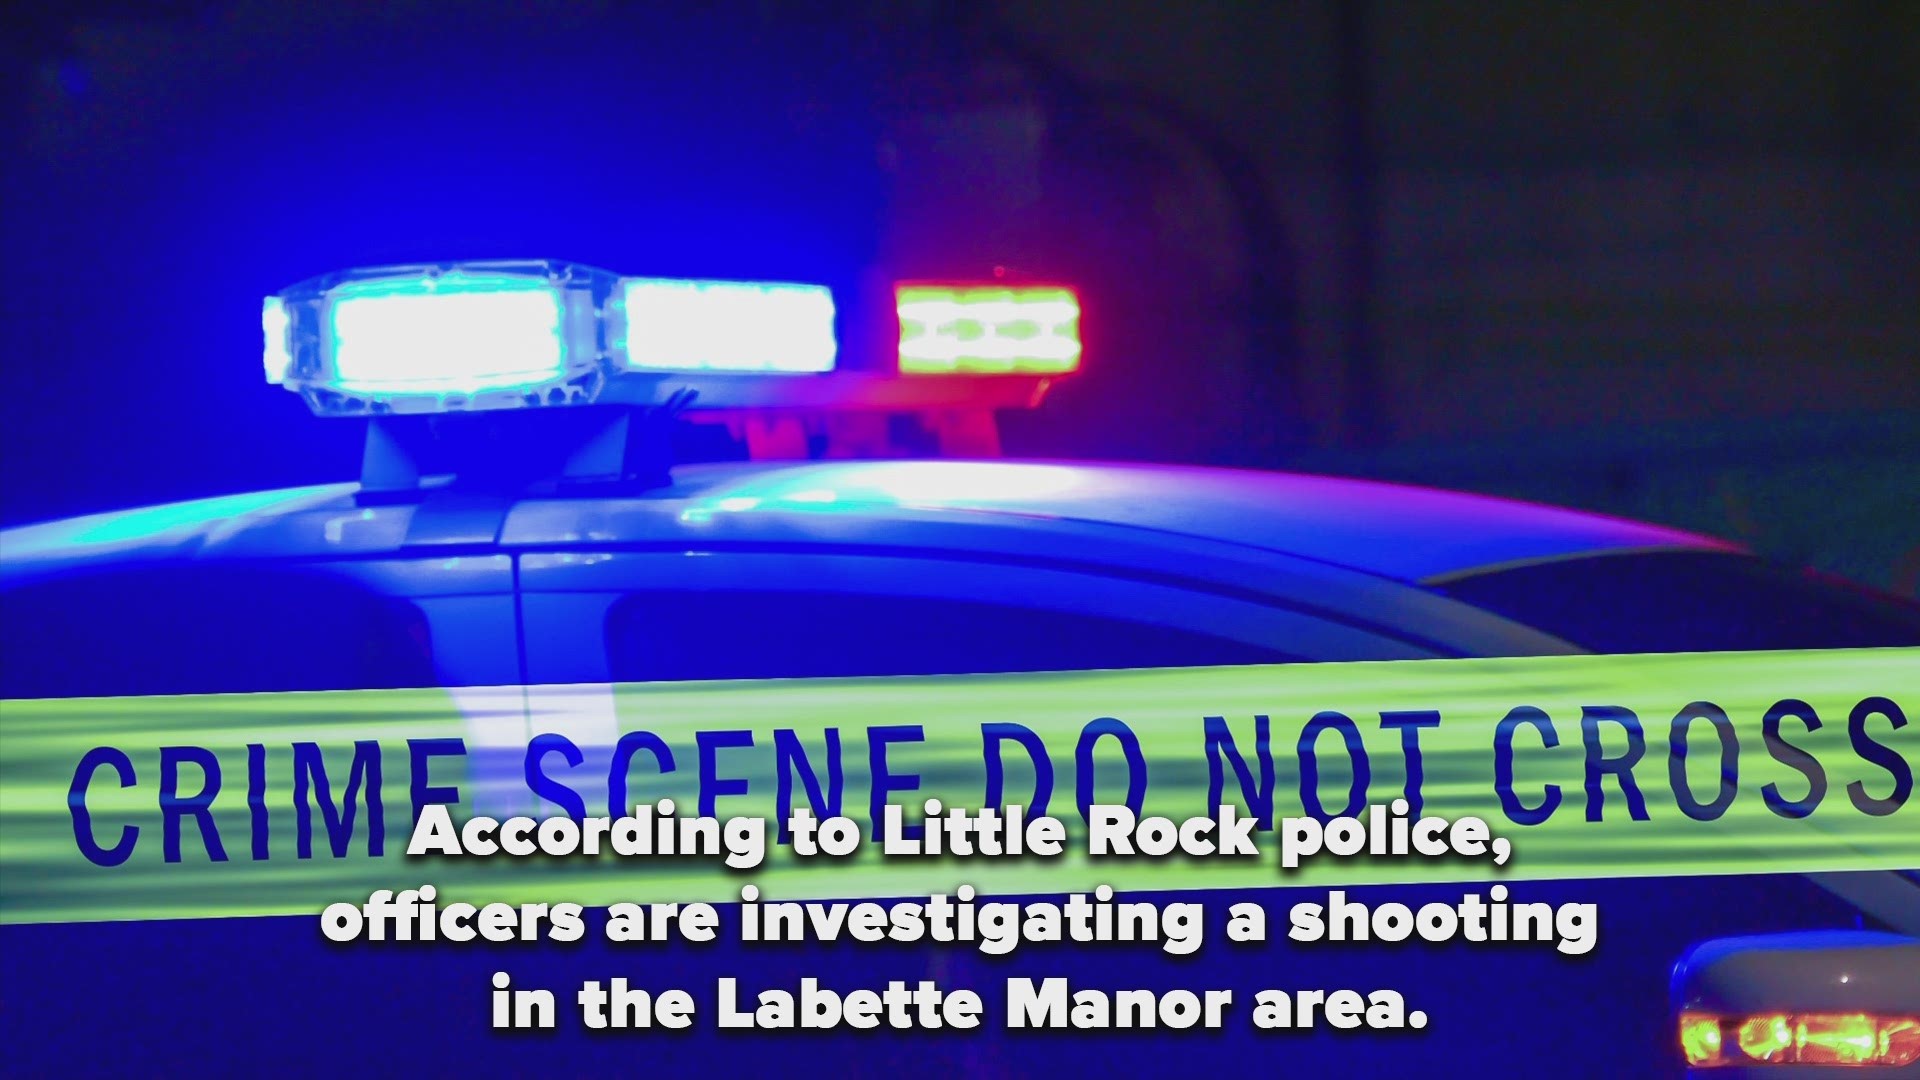 According to Little Rock police, two victims are injured after a shooting in the Labette Manor area.